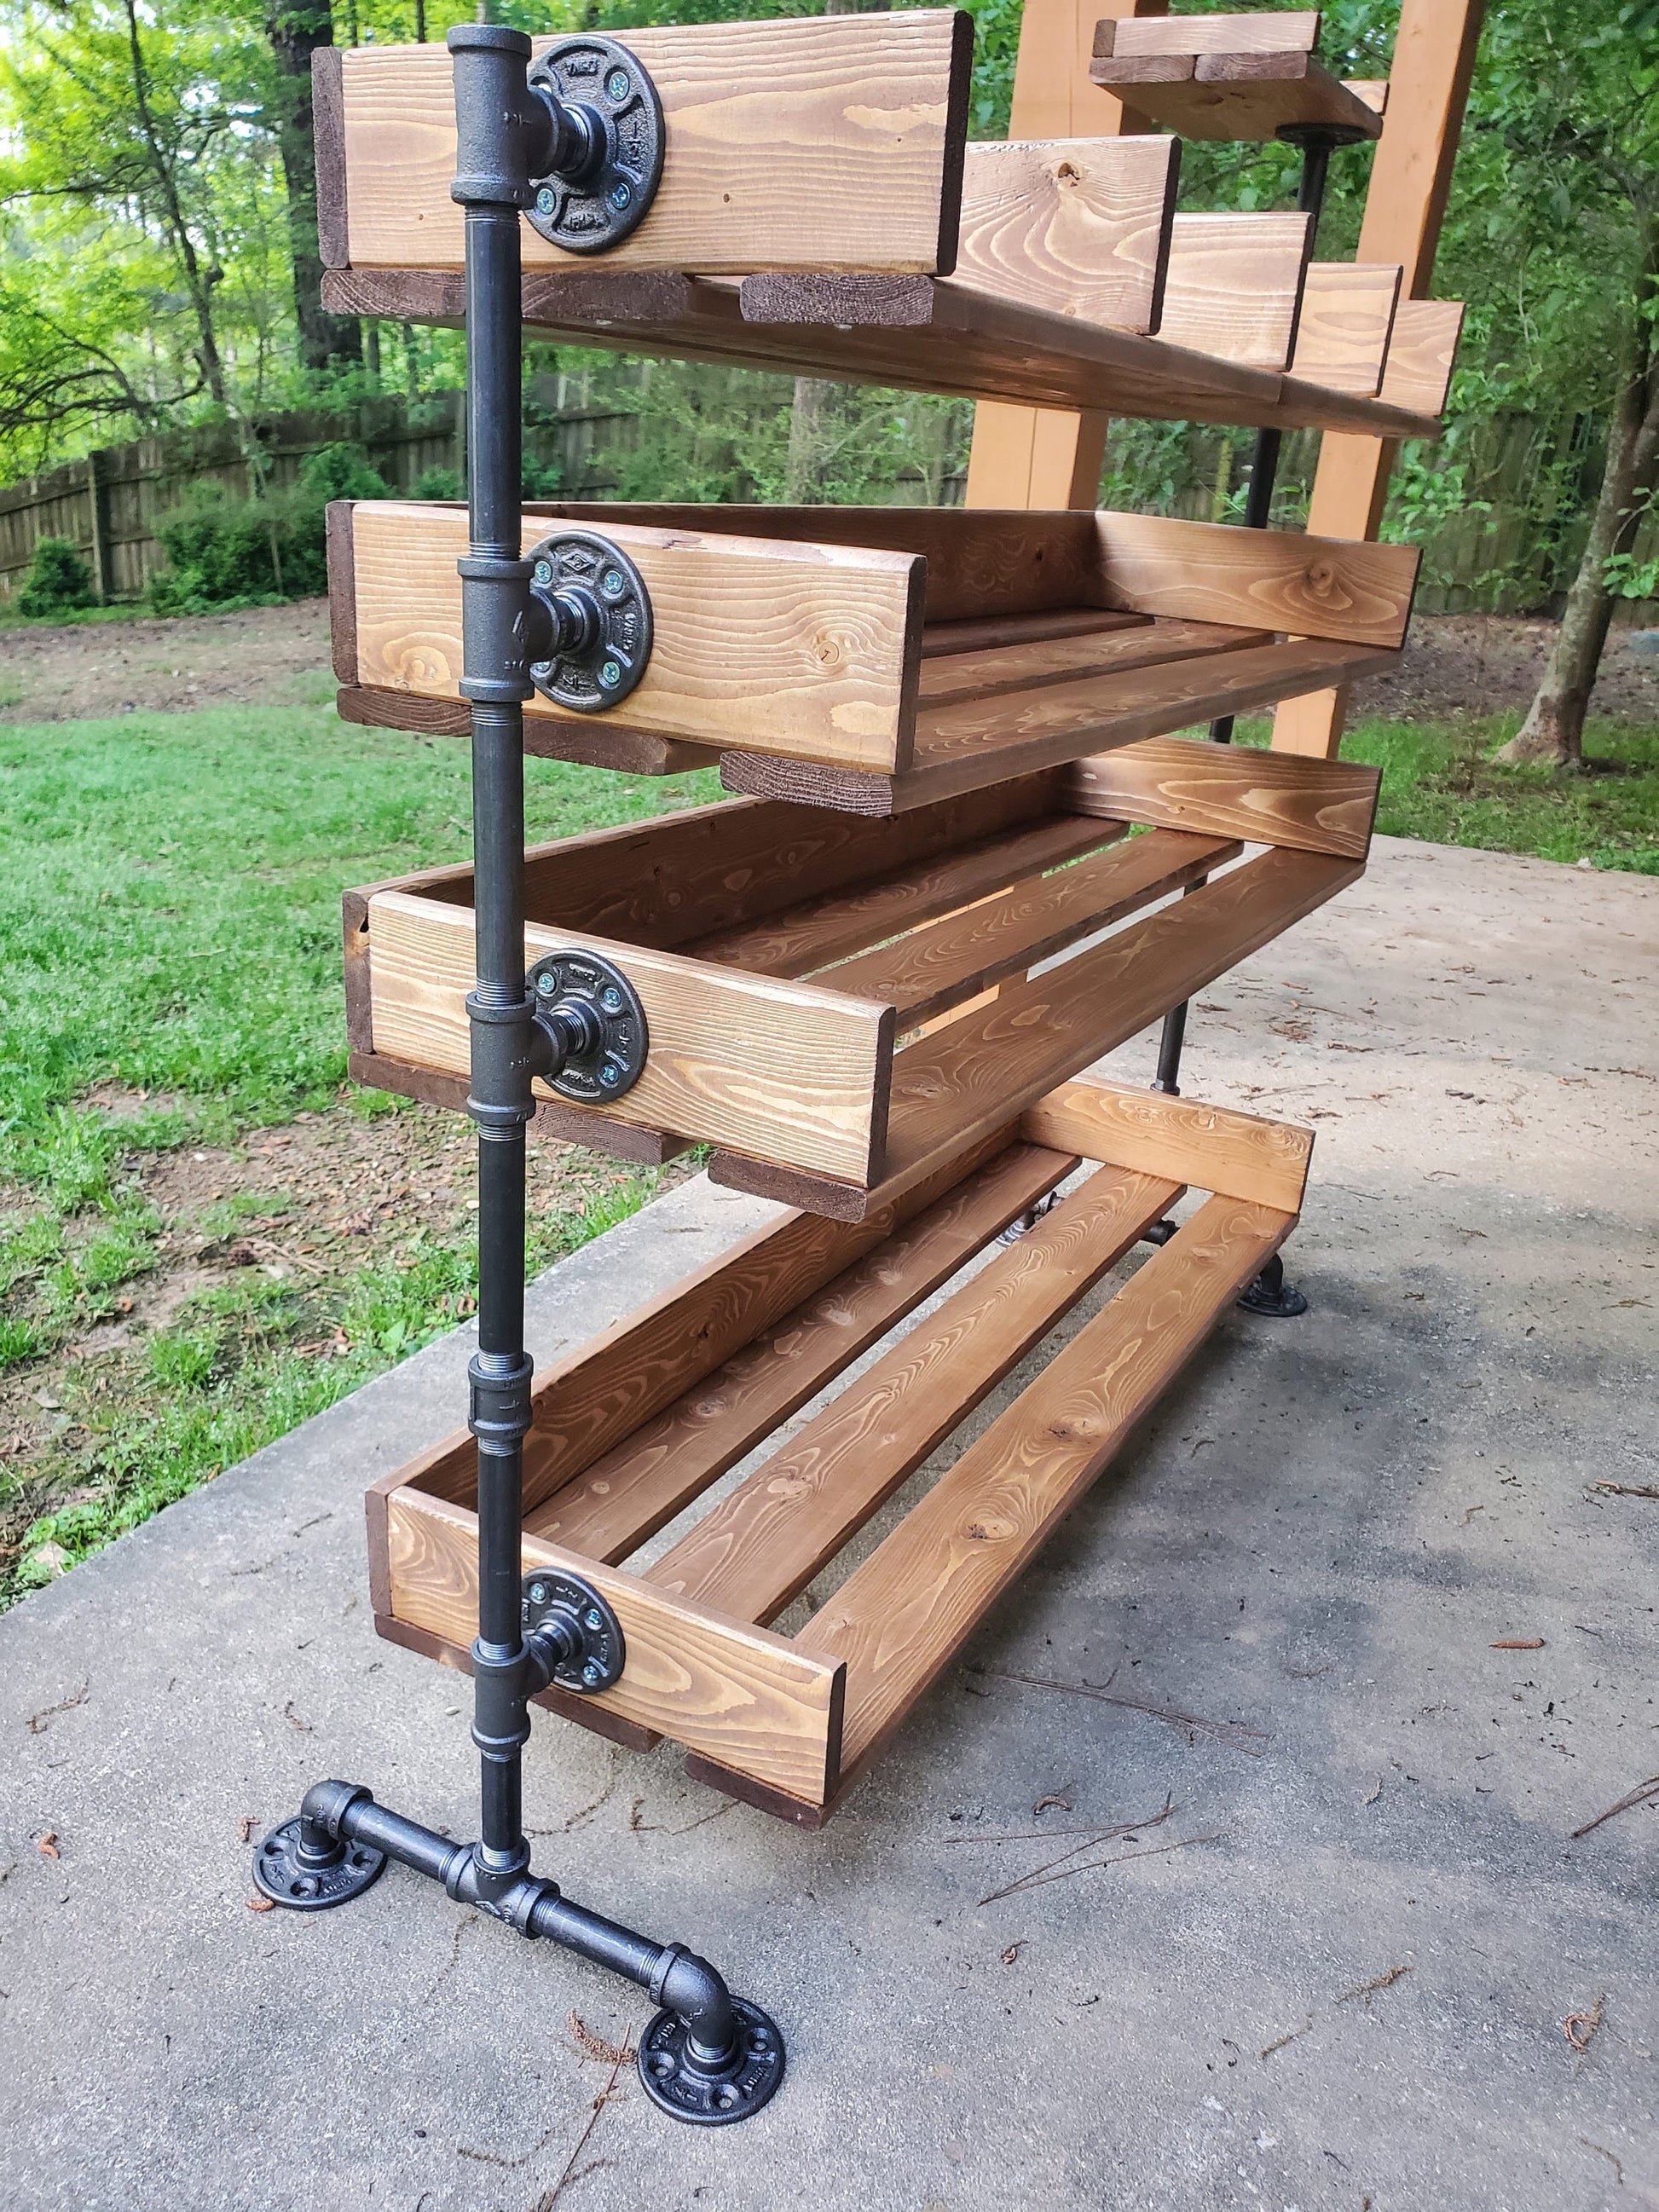 Handmade Reclaimed Cubbies Wood Shoe Stand/ Boot level / Rack / Organizer with Pipe Stand Legs